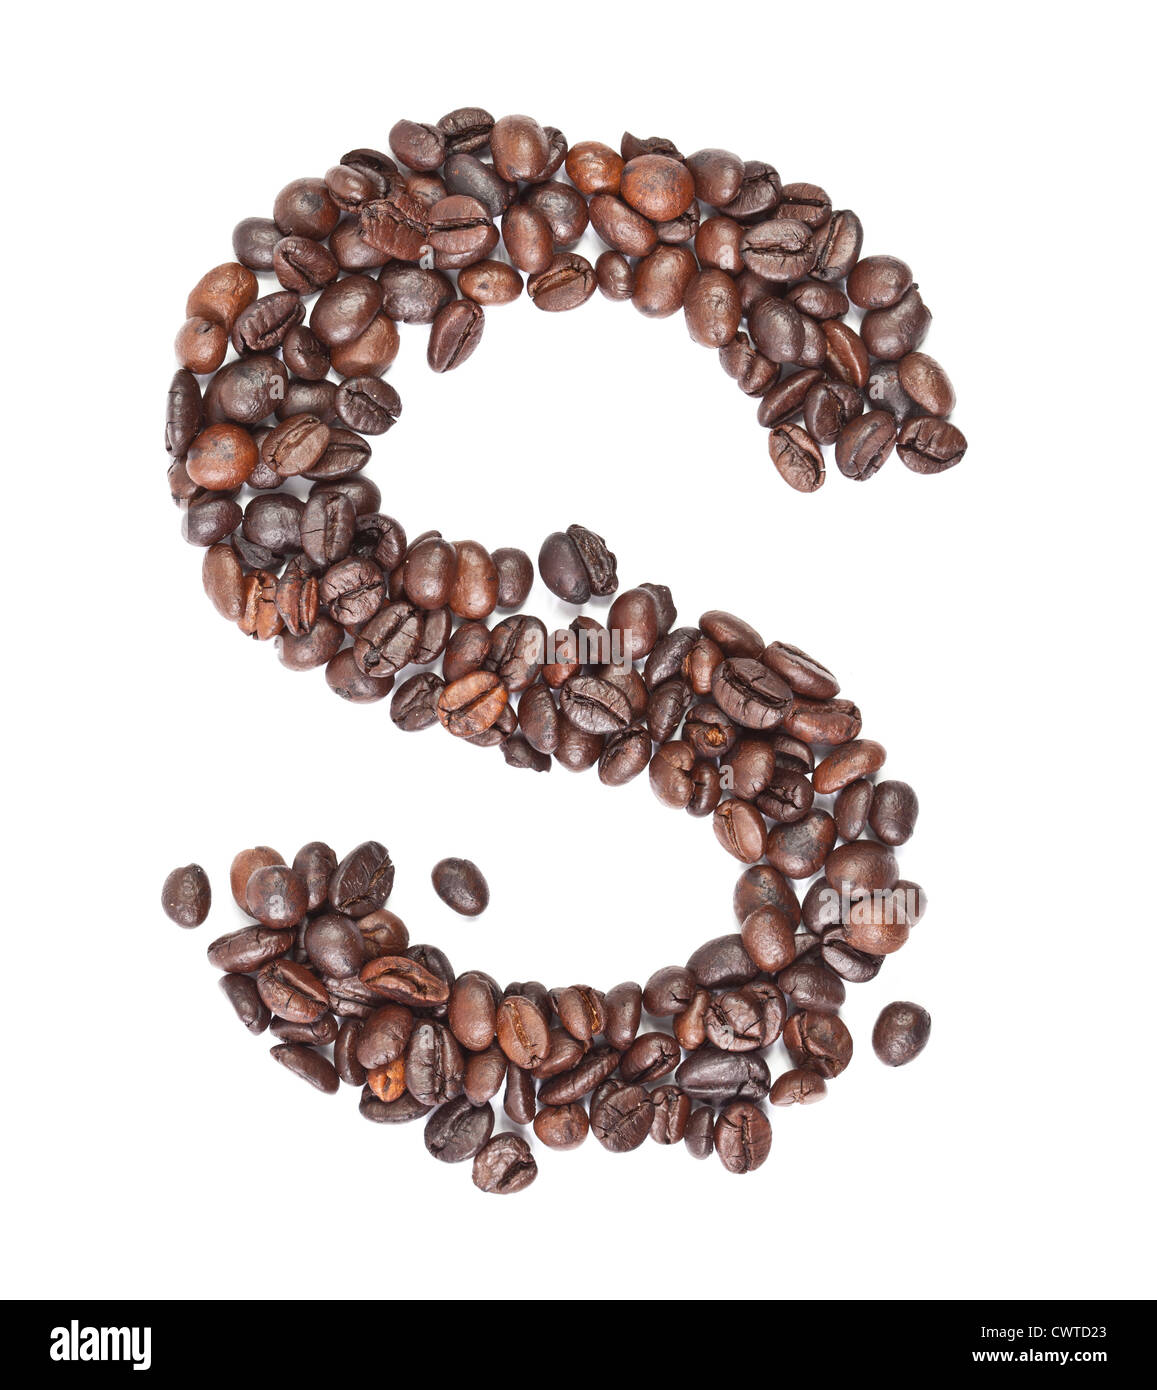 S, Alphabet from coffee beans on white background. Stock Photo